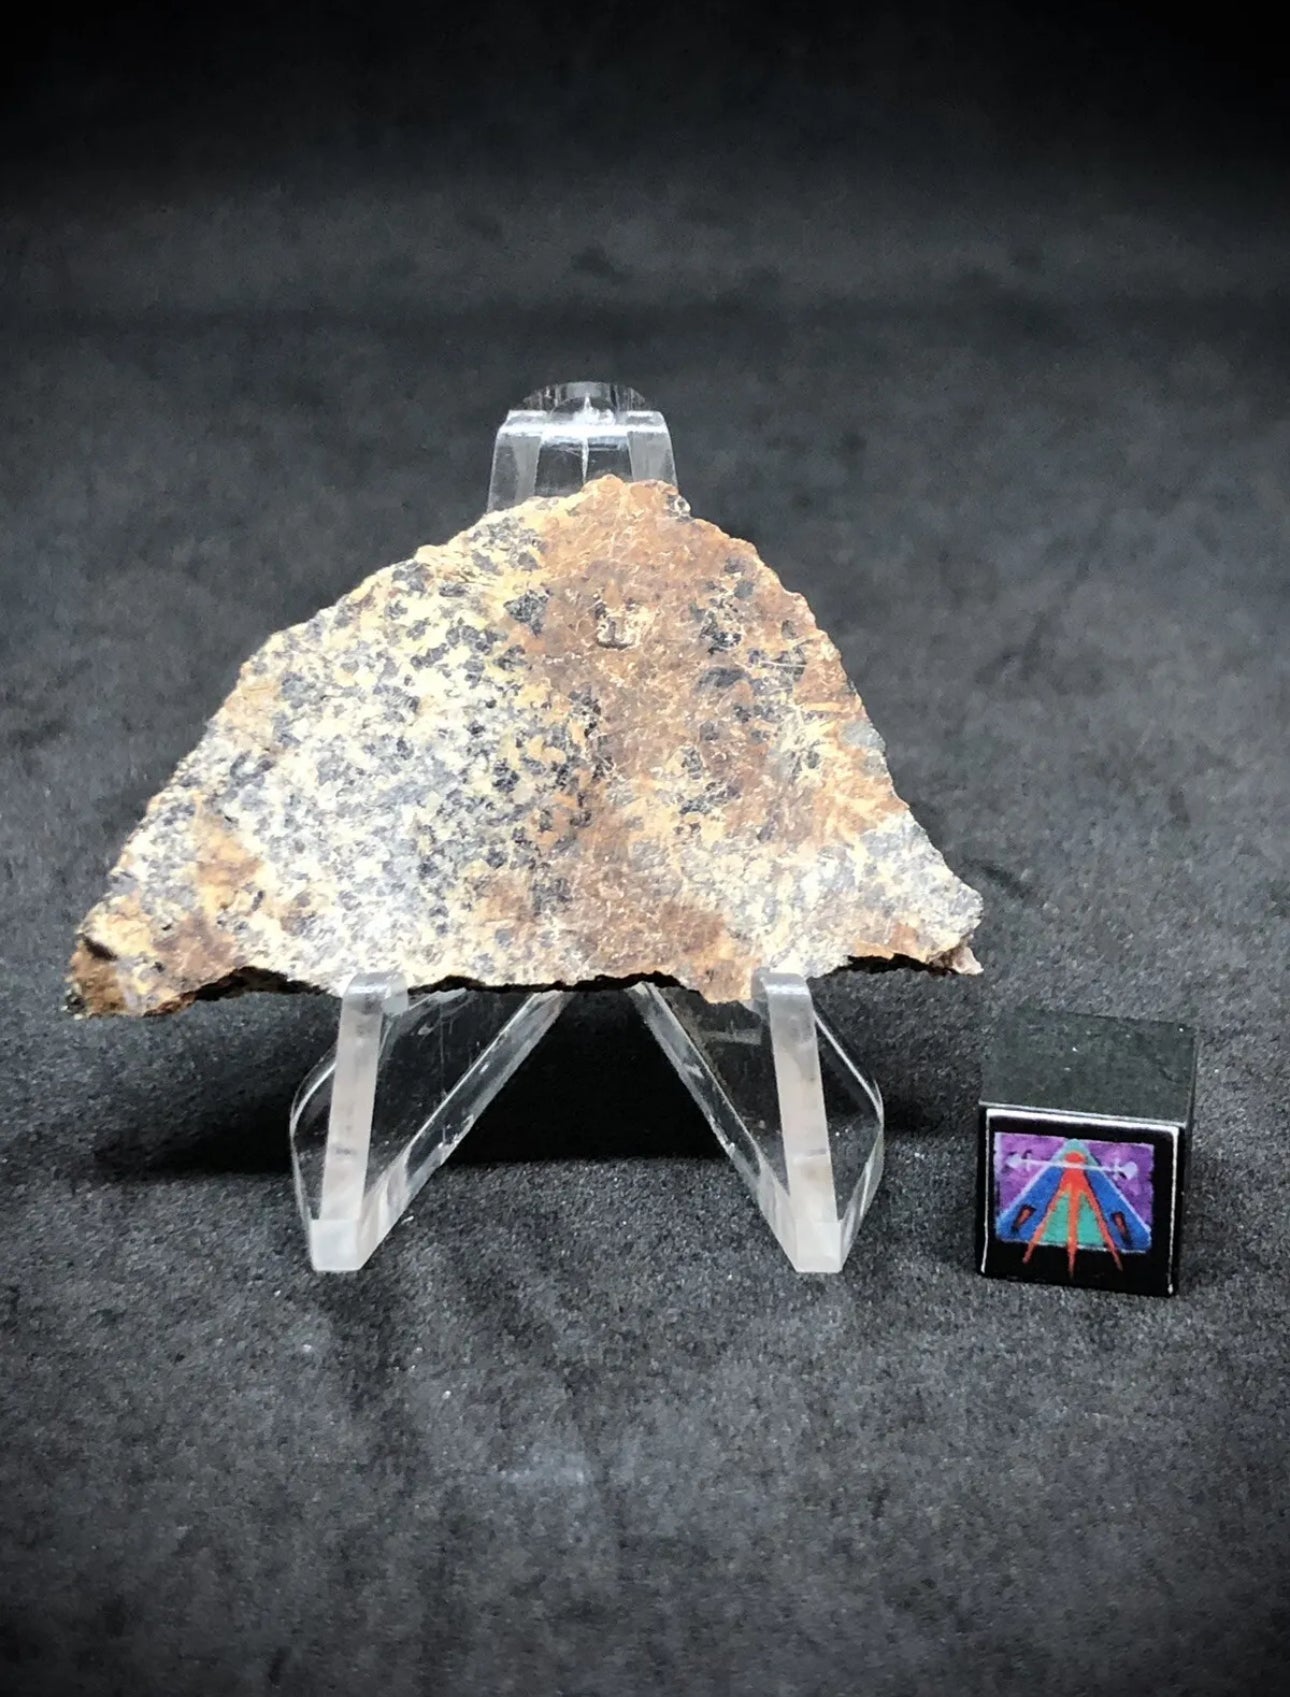 NWA 16312 Eucrite Meteorite - 6g - Part Of The HED Group